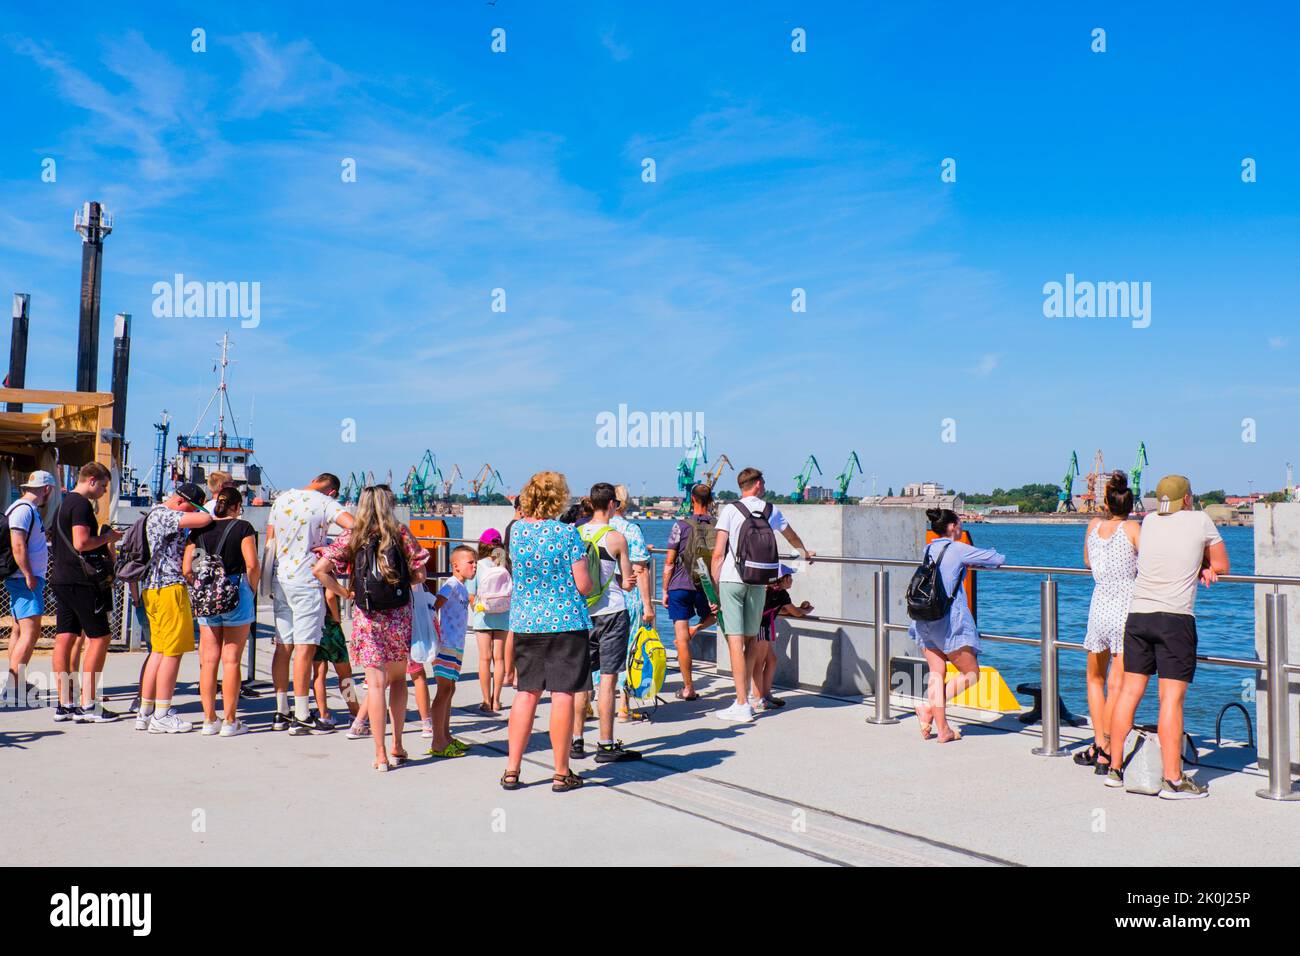 People waiting for the ferry, Smiltyne, Curonian Spit, Lithuania Stock Photo